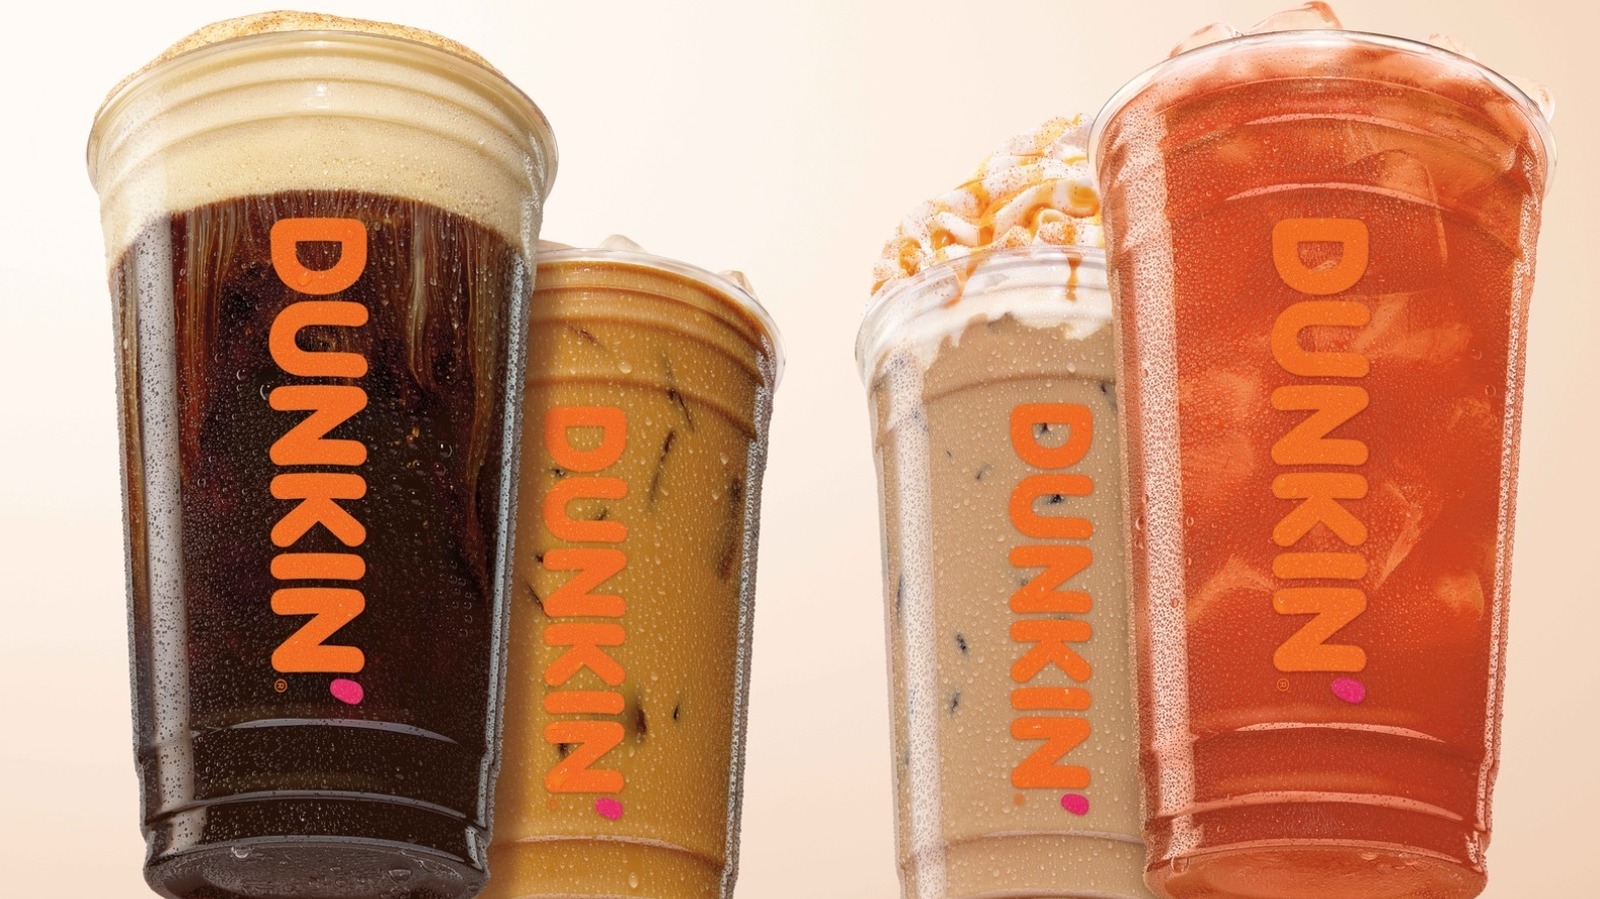 Iced Coffee Drinks From Dunkin's Secret Menu You Need To Try